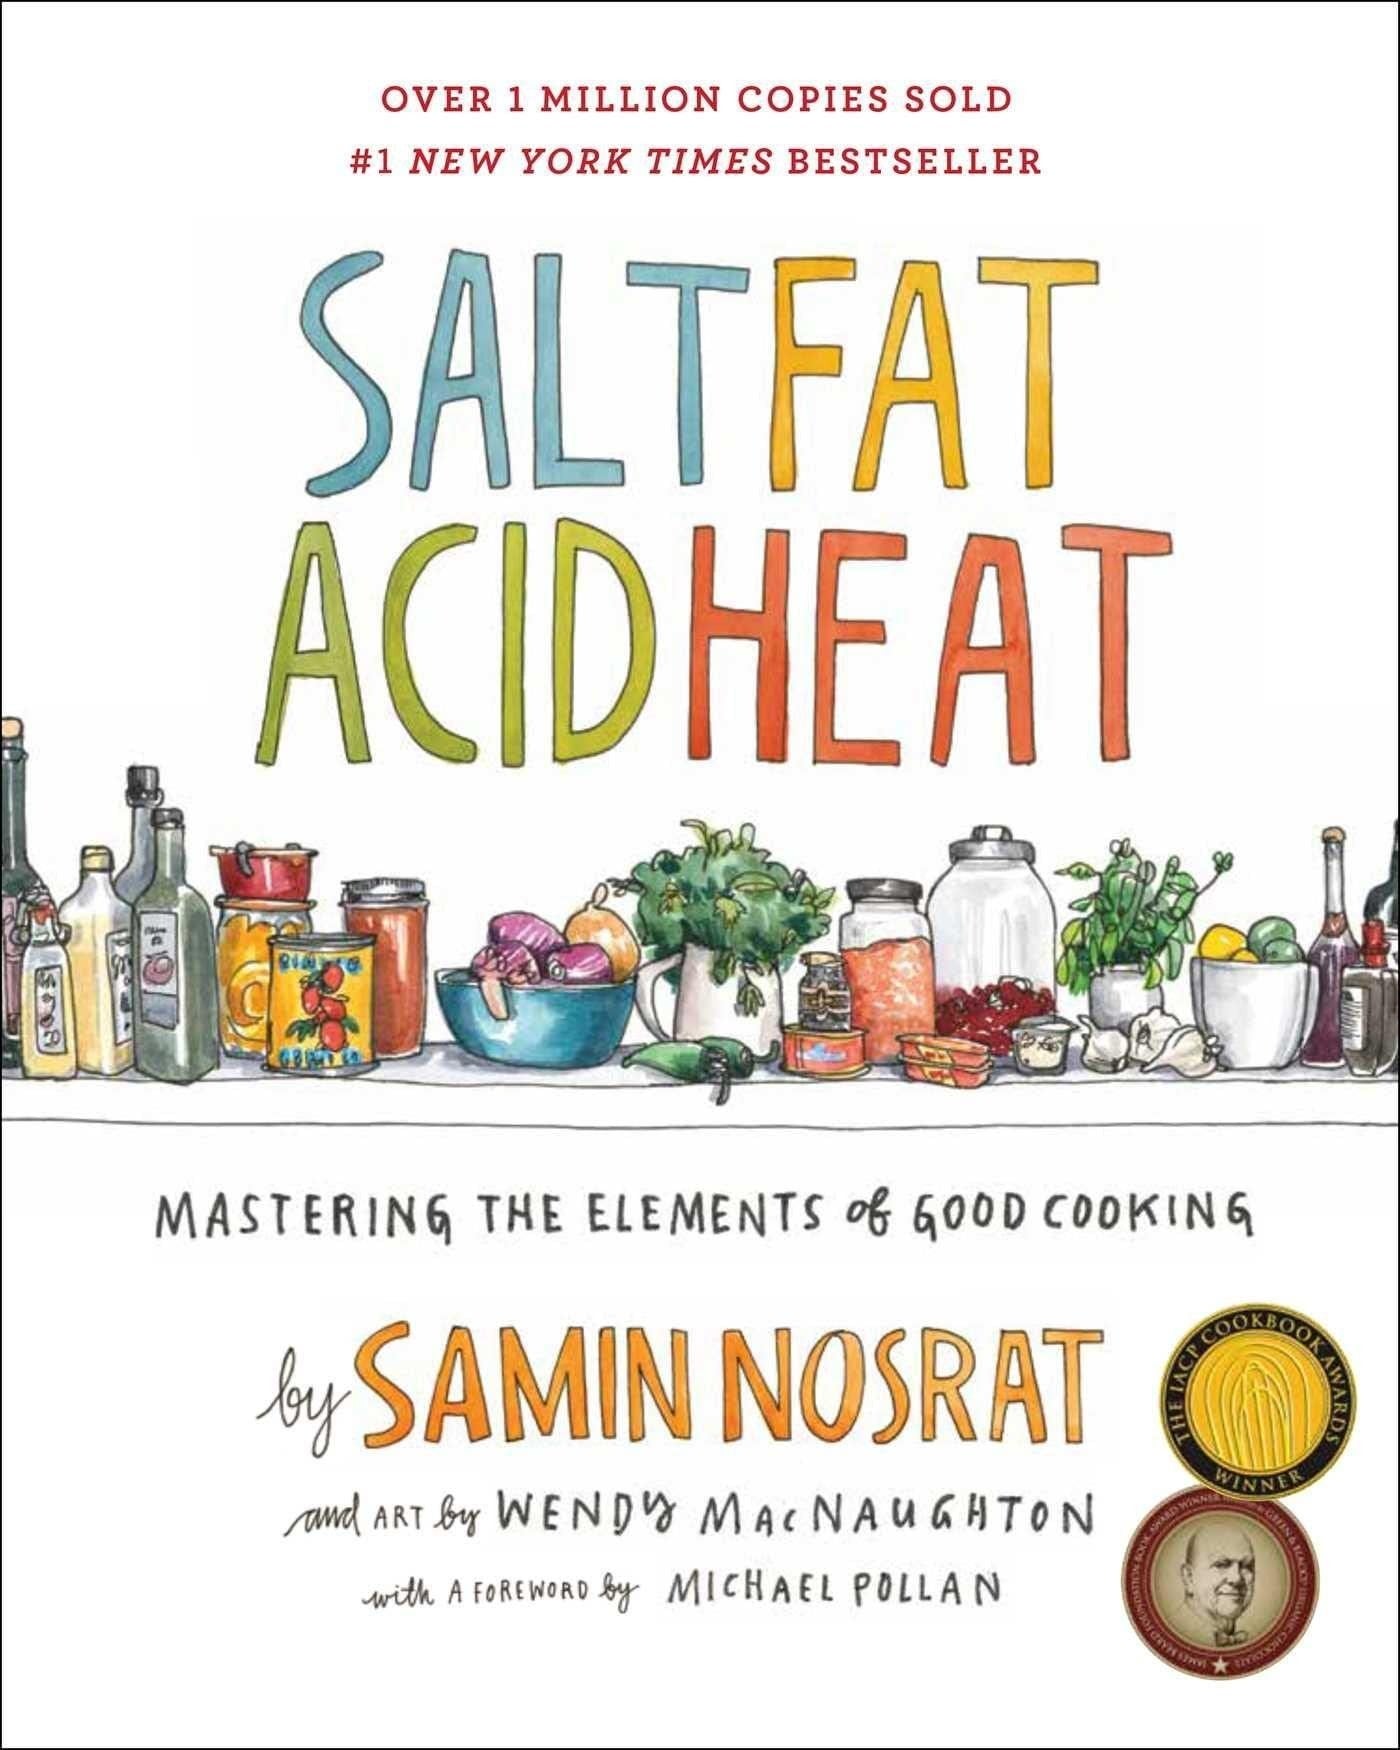 the white Salt, Fat, Acid, Heat cookbook cover with multicolored lettering an illustration of various cooking ingredients